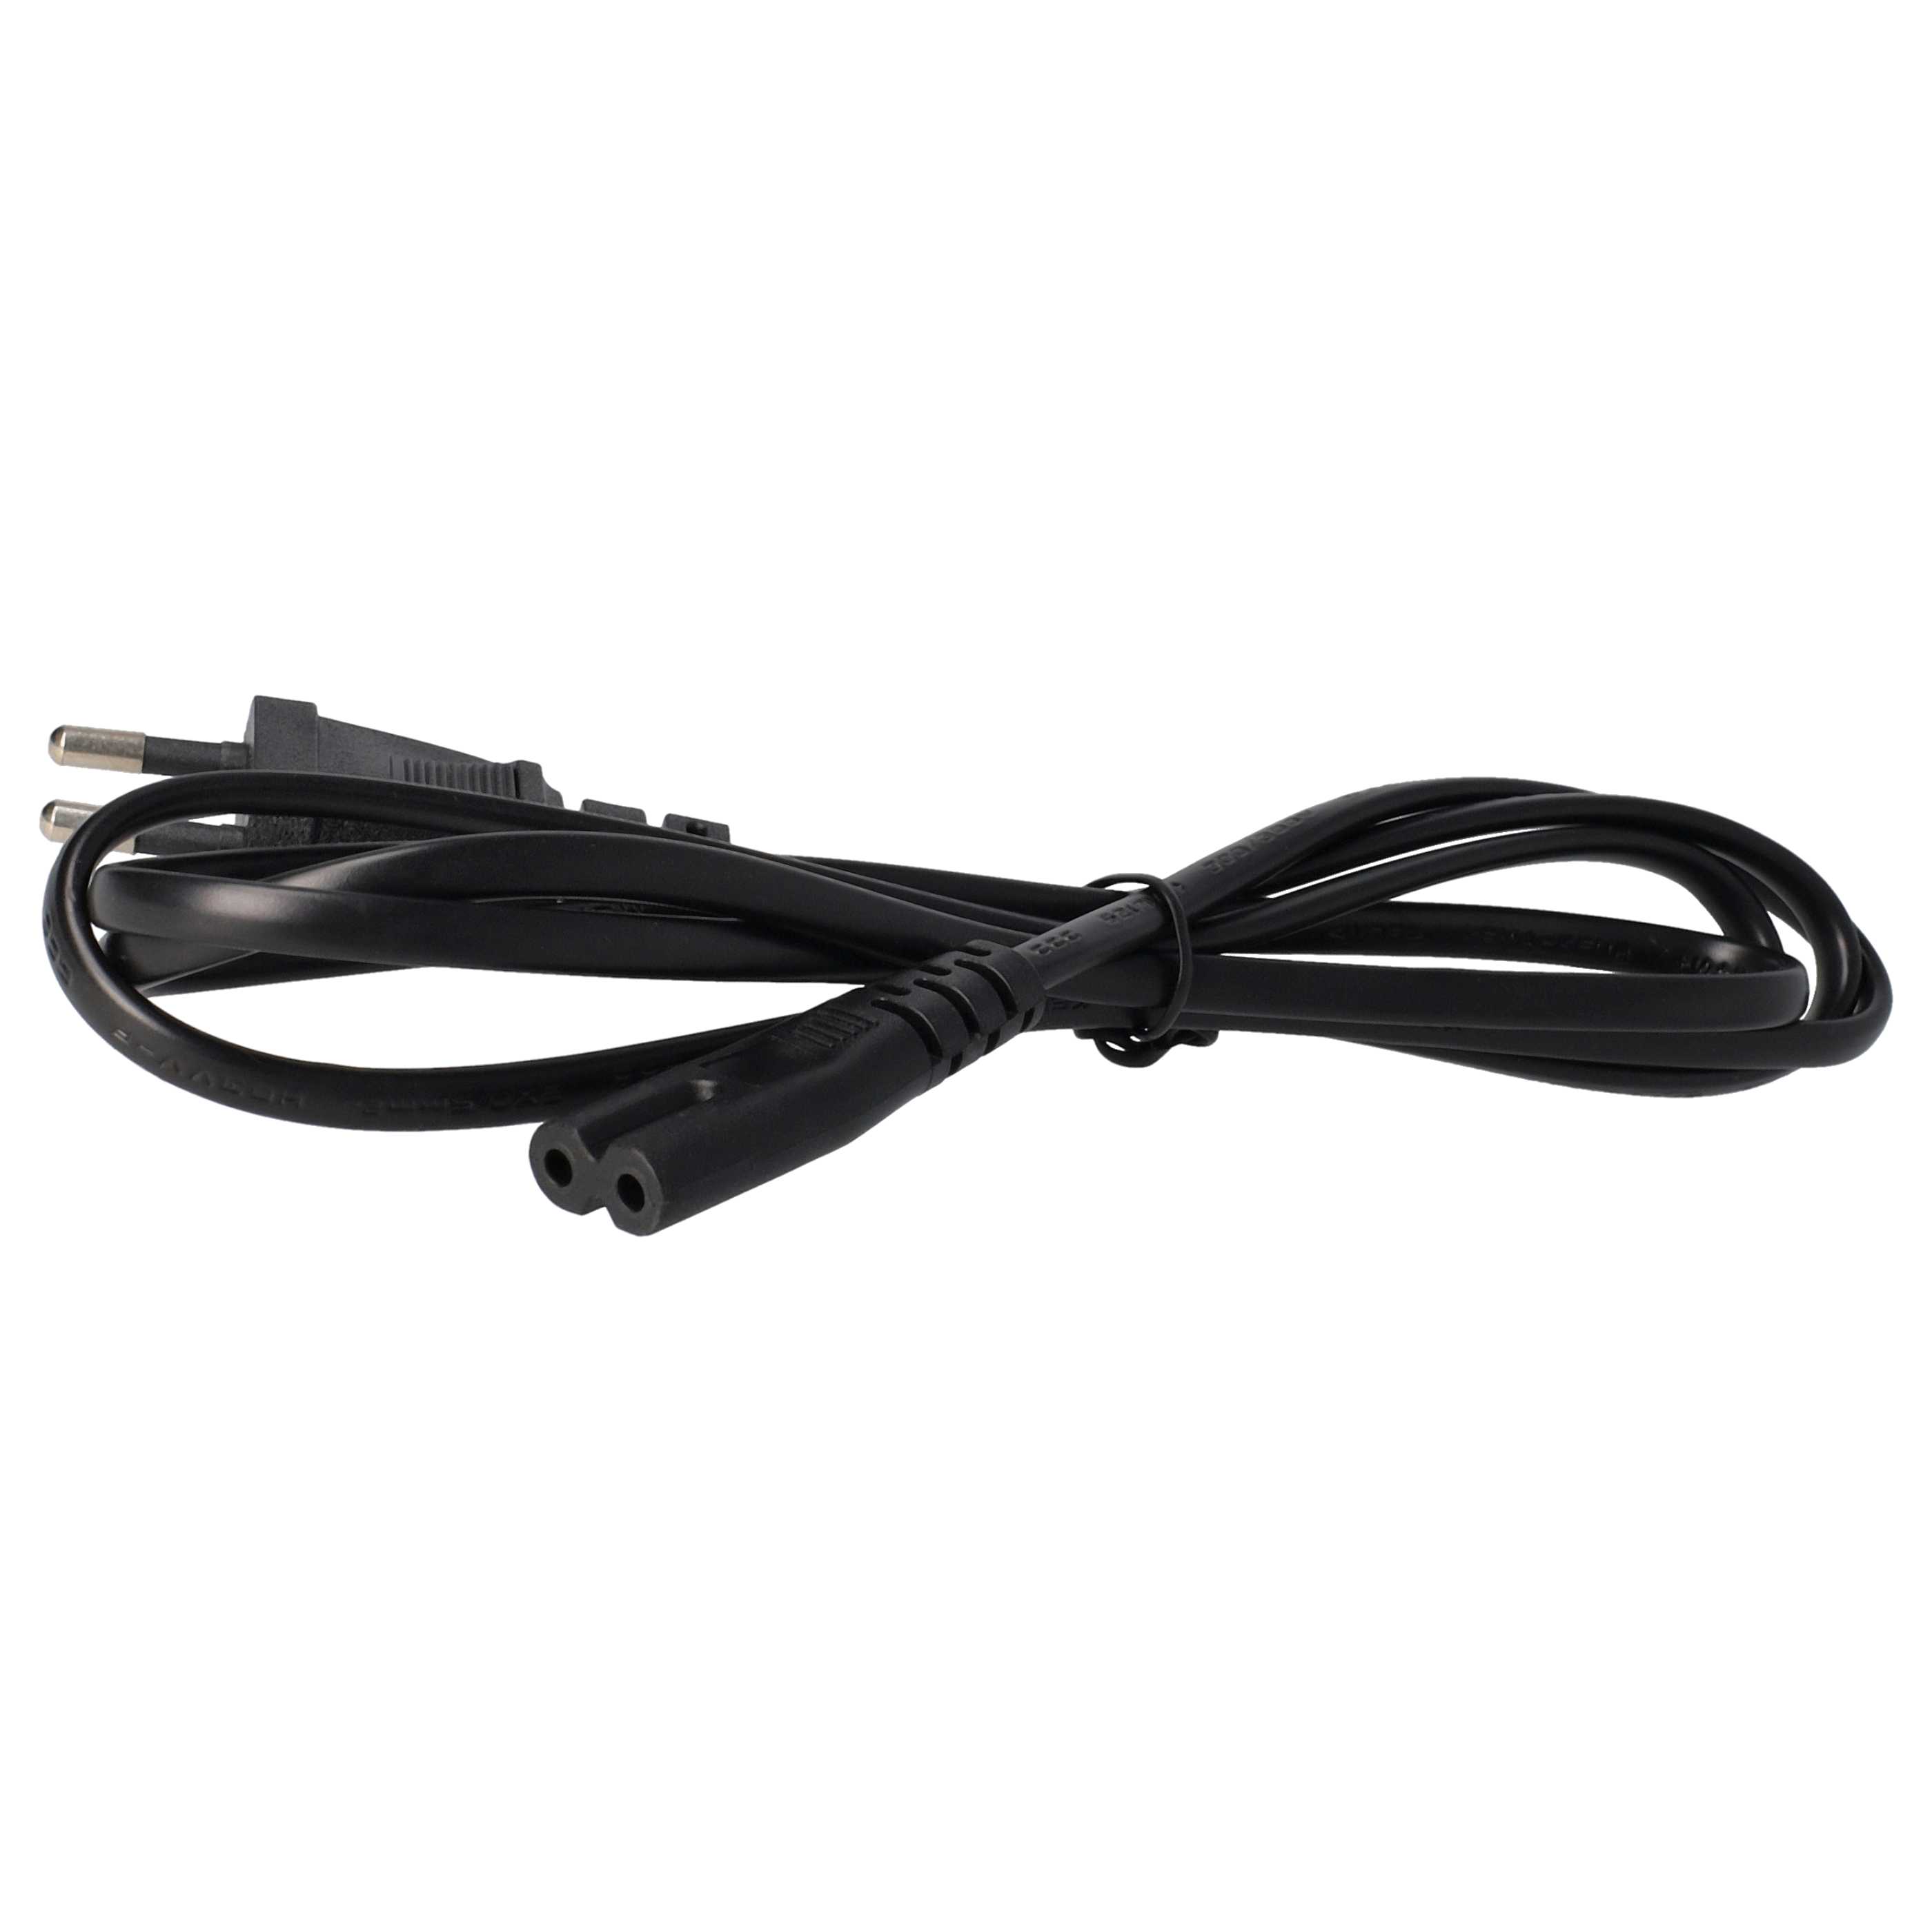 Alimentatore sostituisce Acer PA-1600-02, 25.10135.011, 25.10064.041, 25.10068.121 per notebook Acer , 60 W